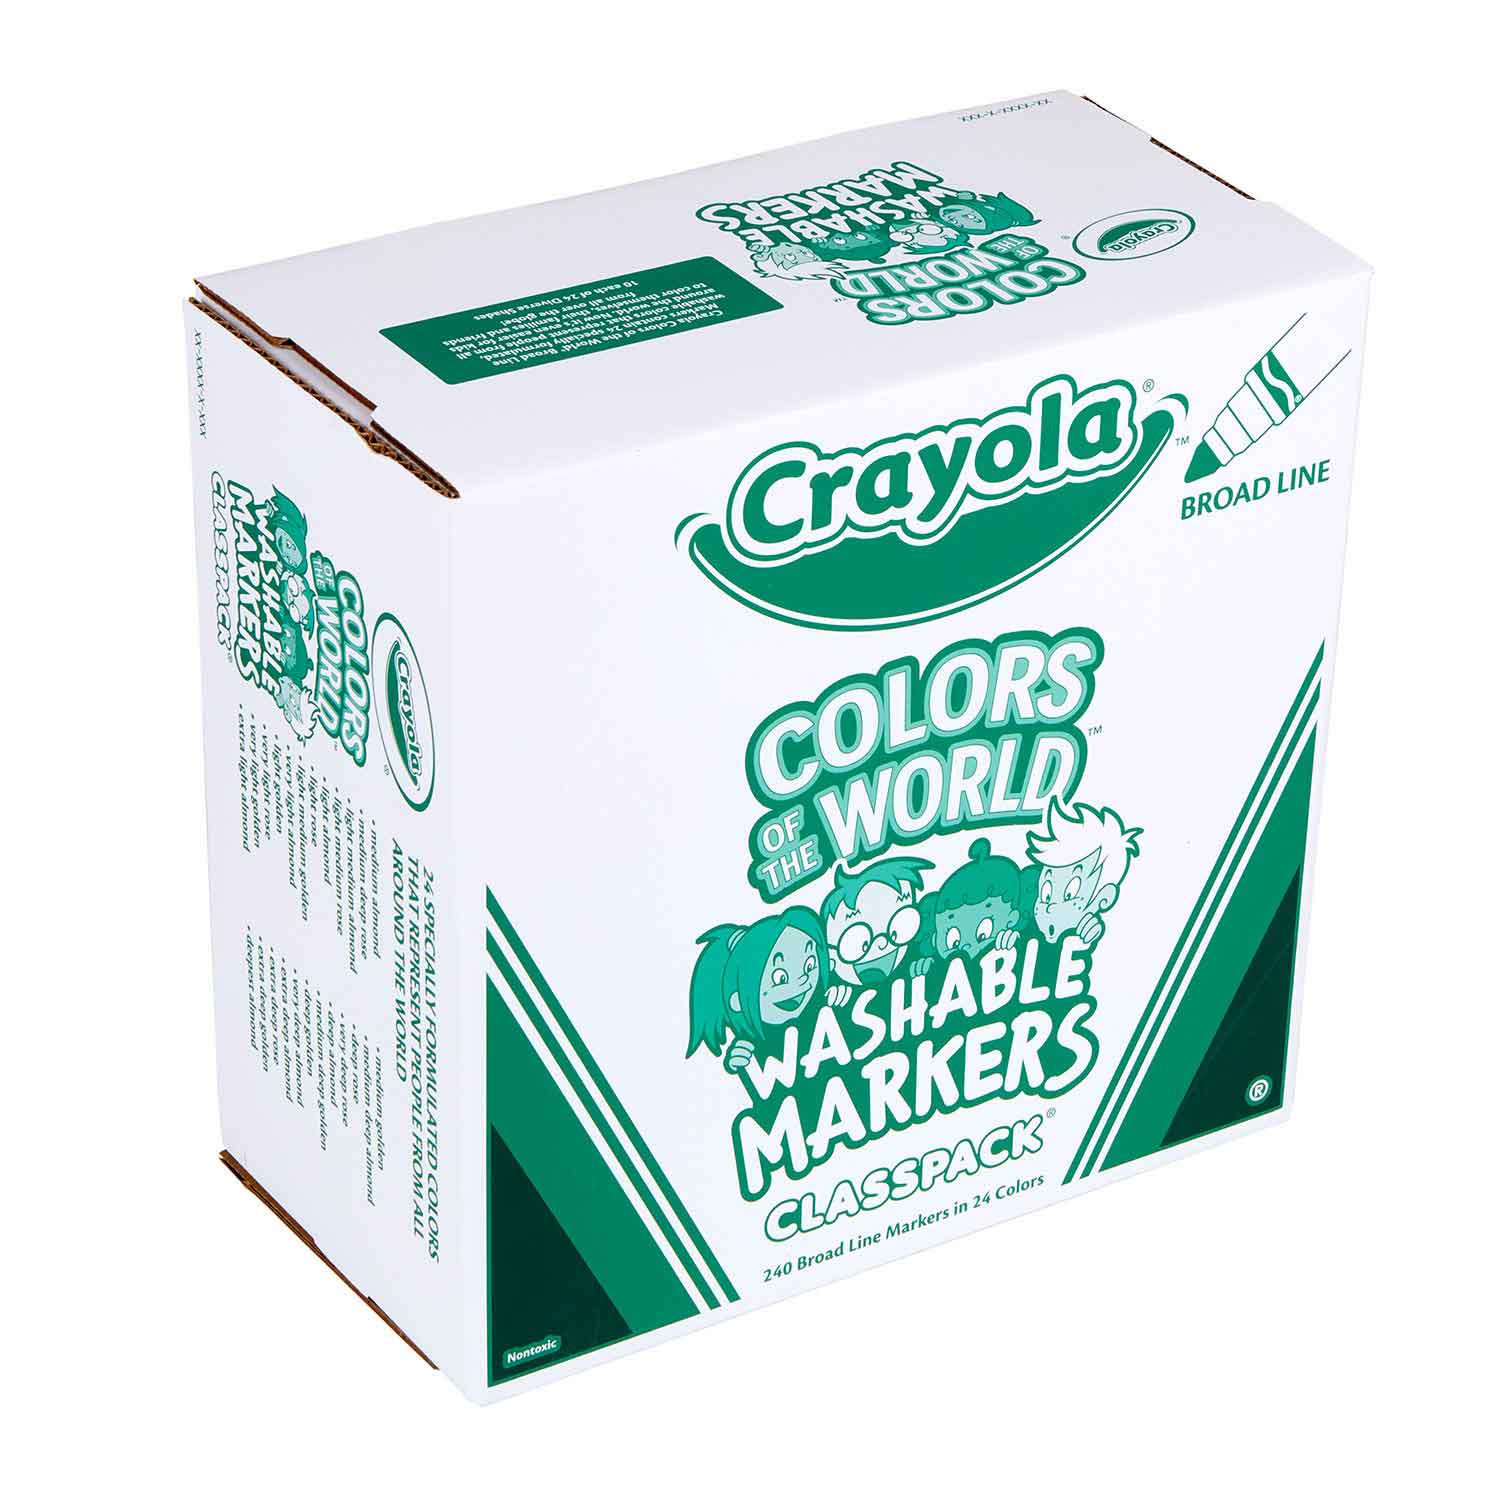 Crayola® Colors Of The World™ Washable Markers Classpack